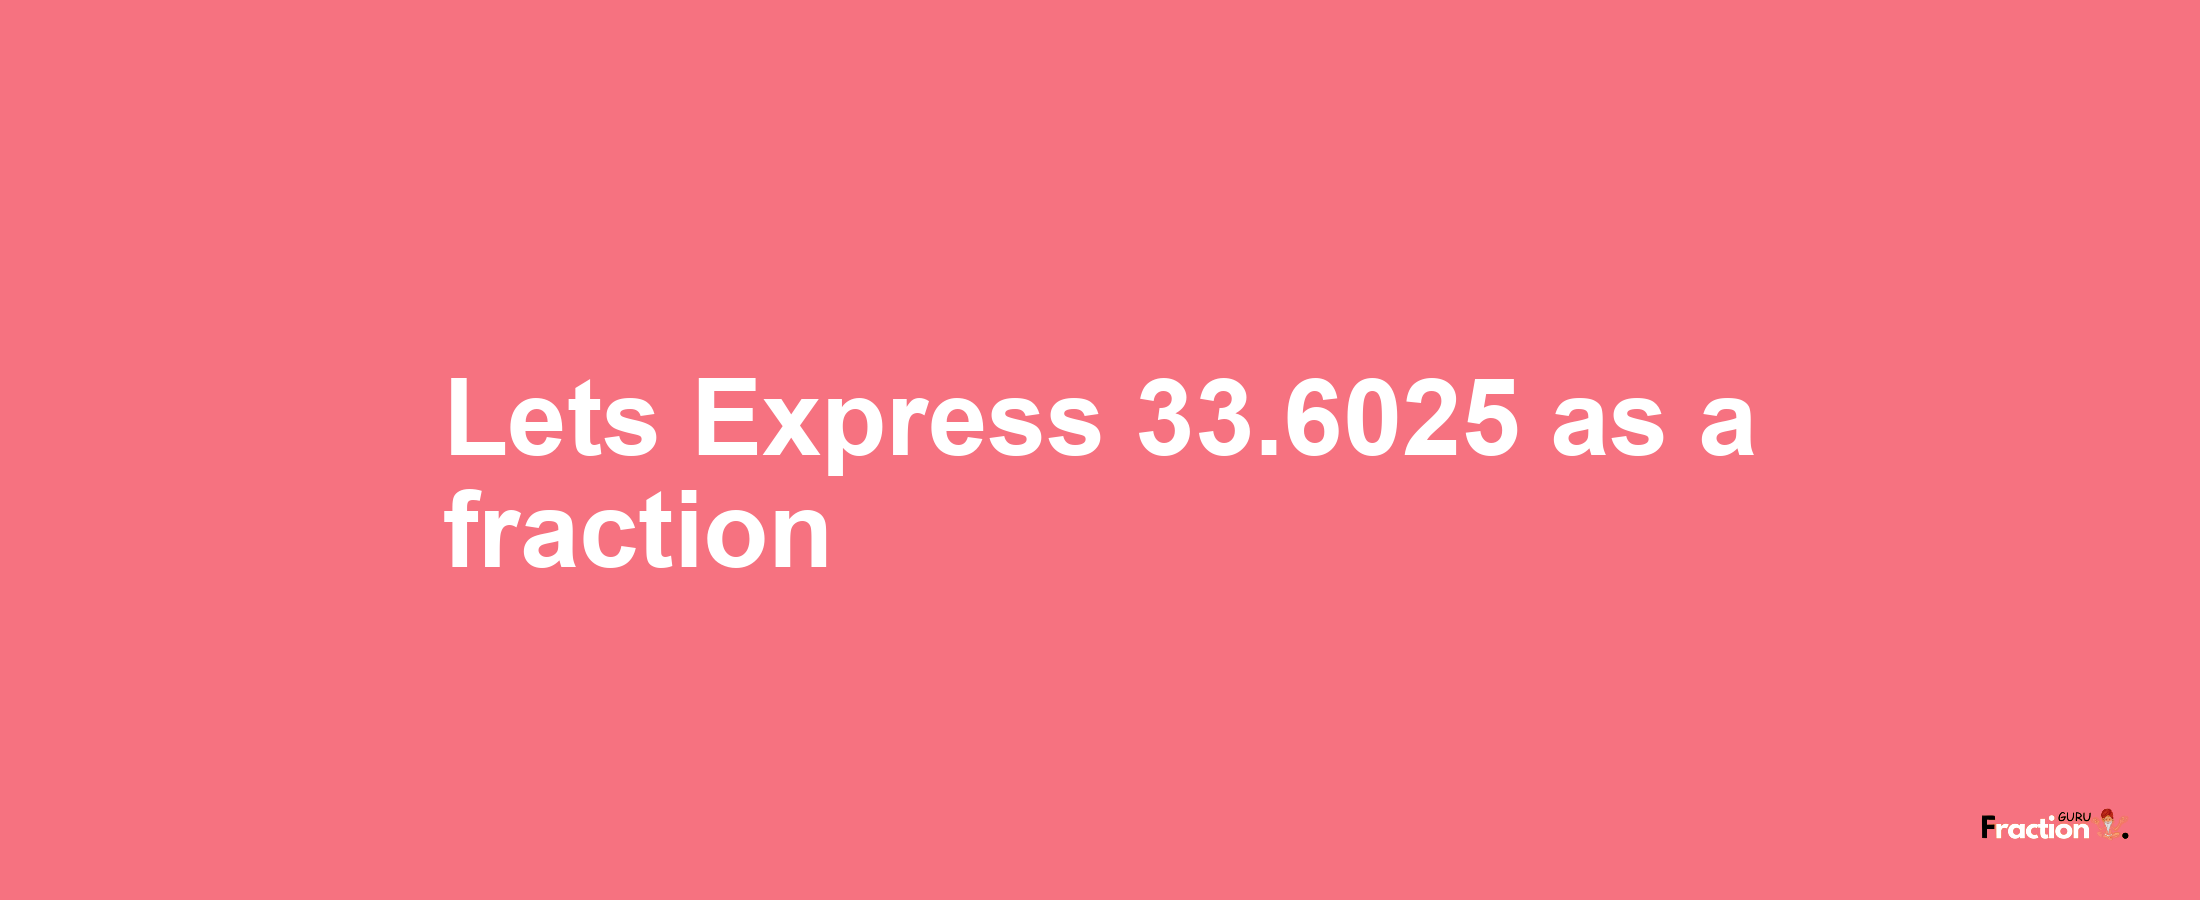 Lets Express 33.6025 as afraction